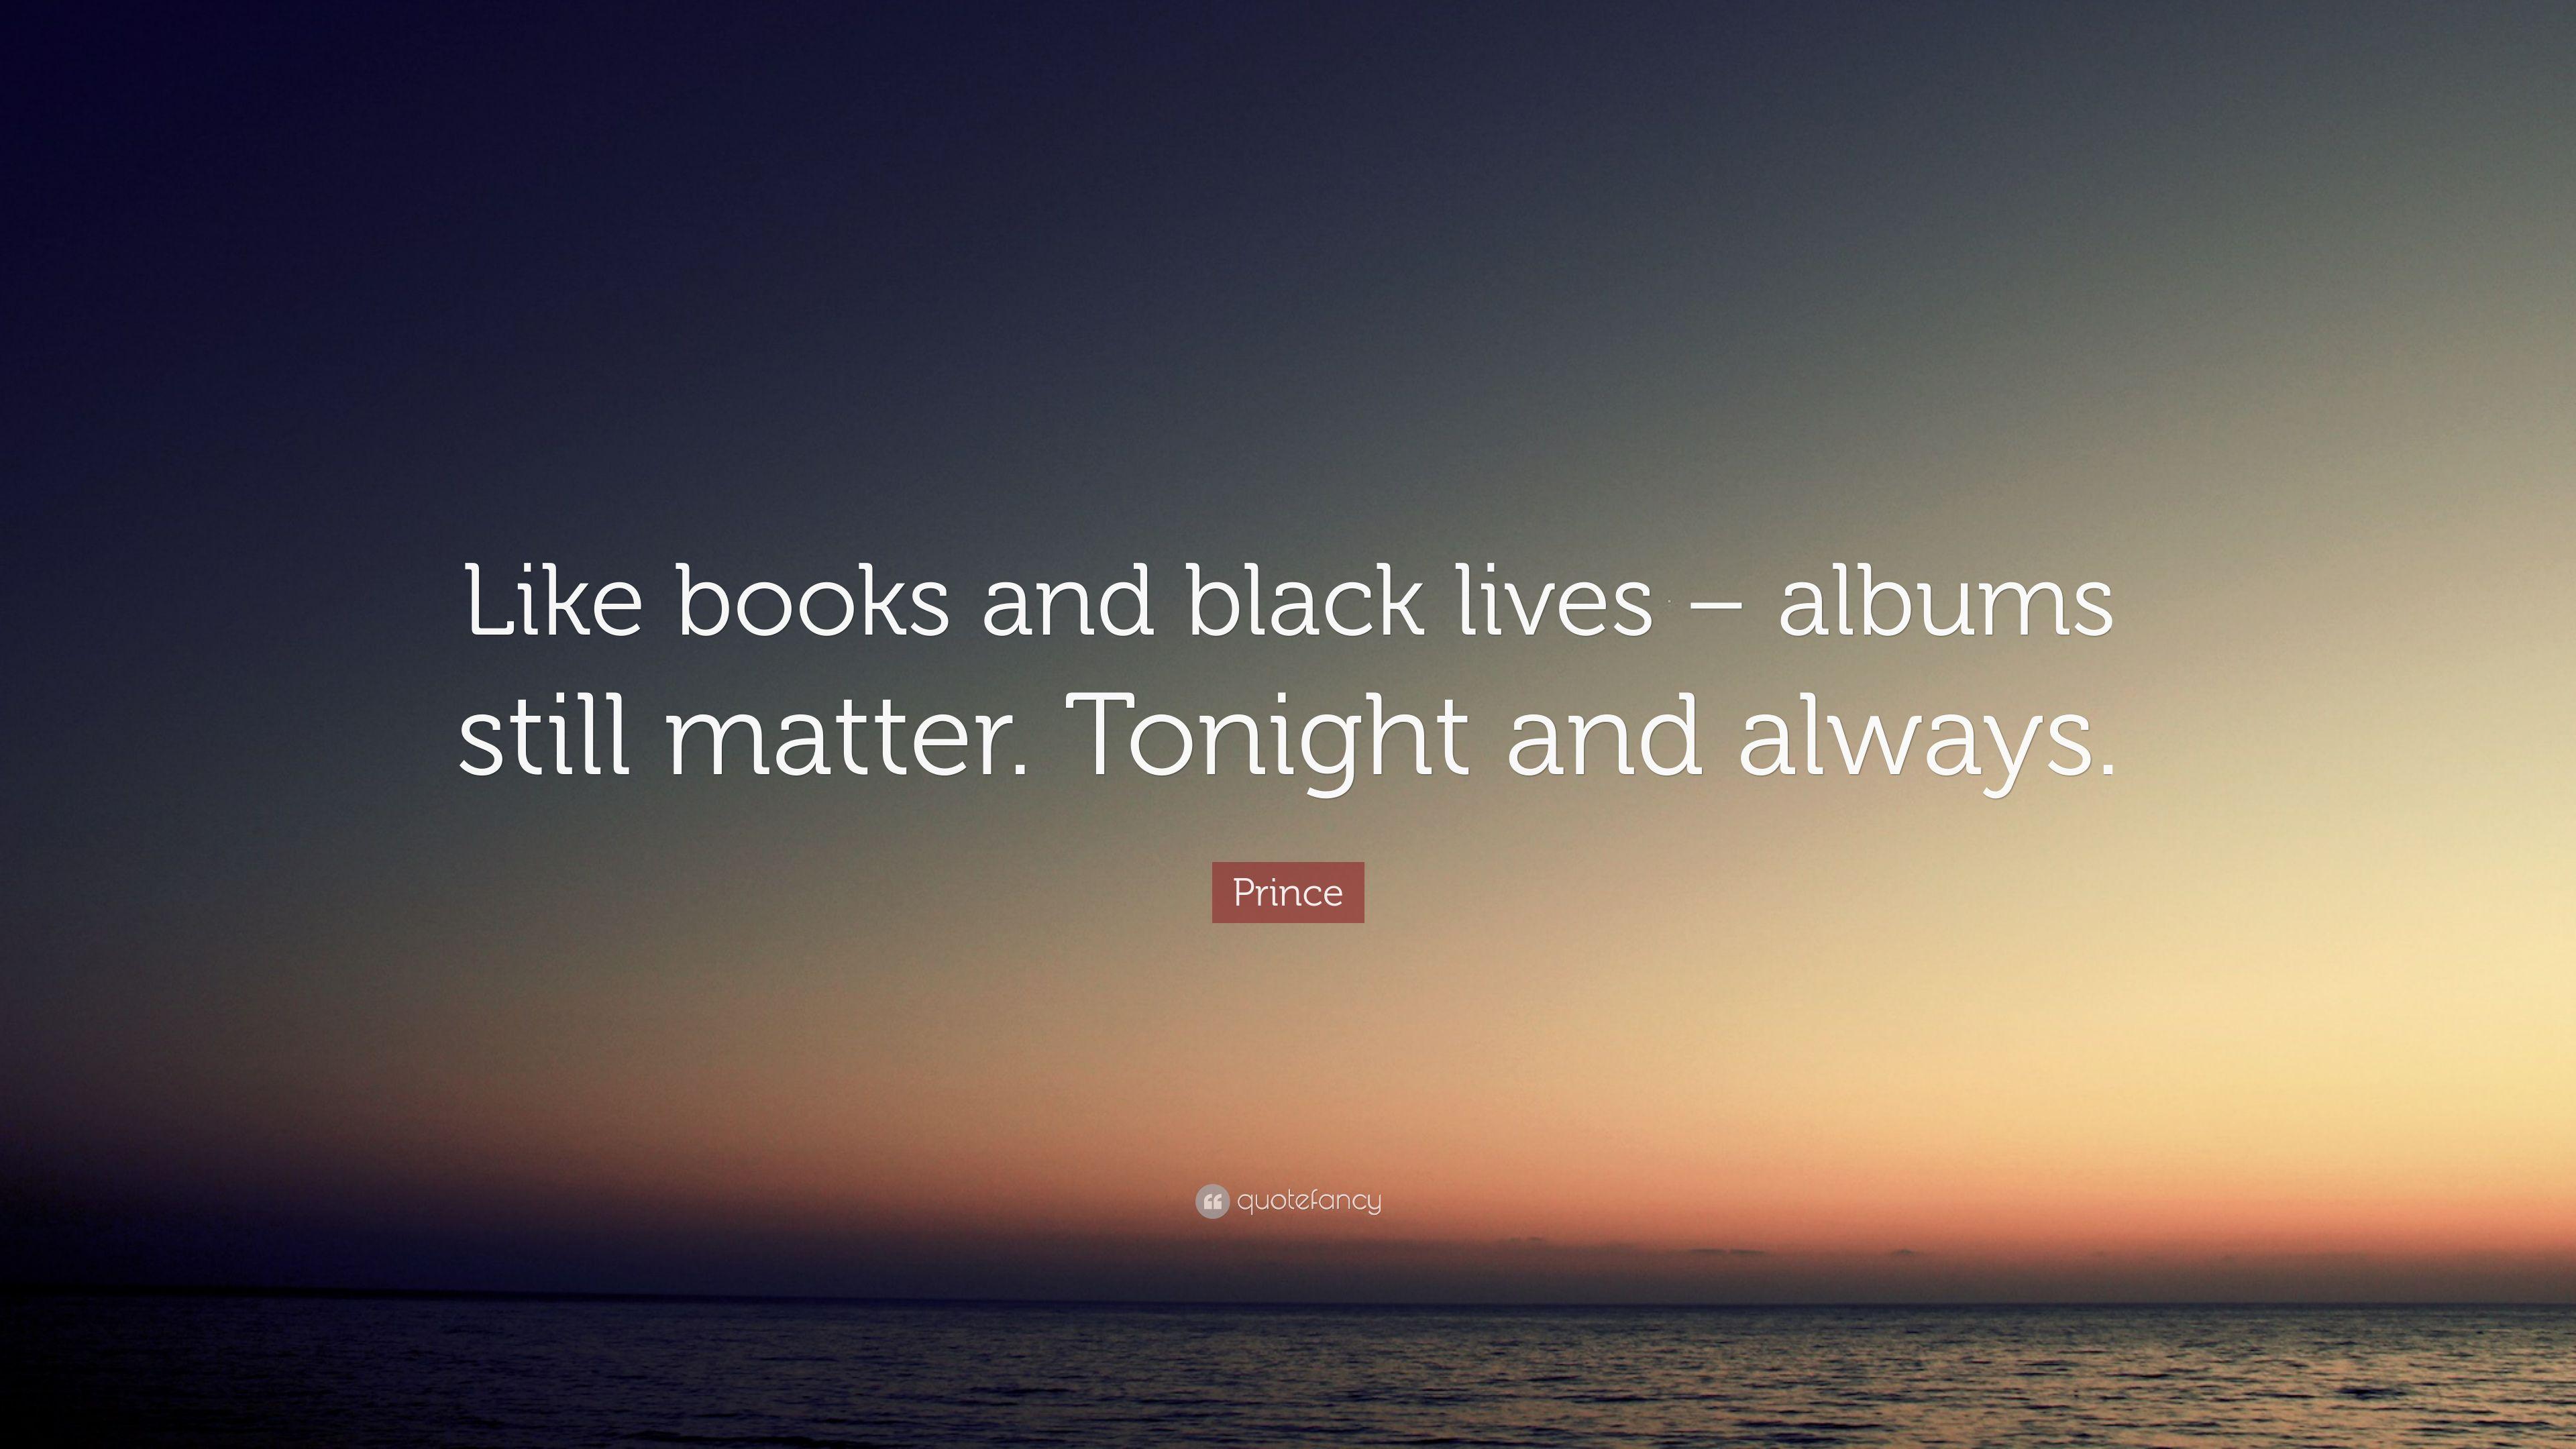 Prince Quote: “Like books and black lives